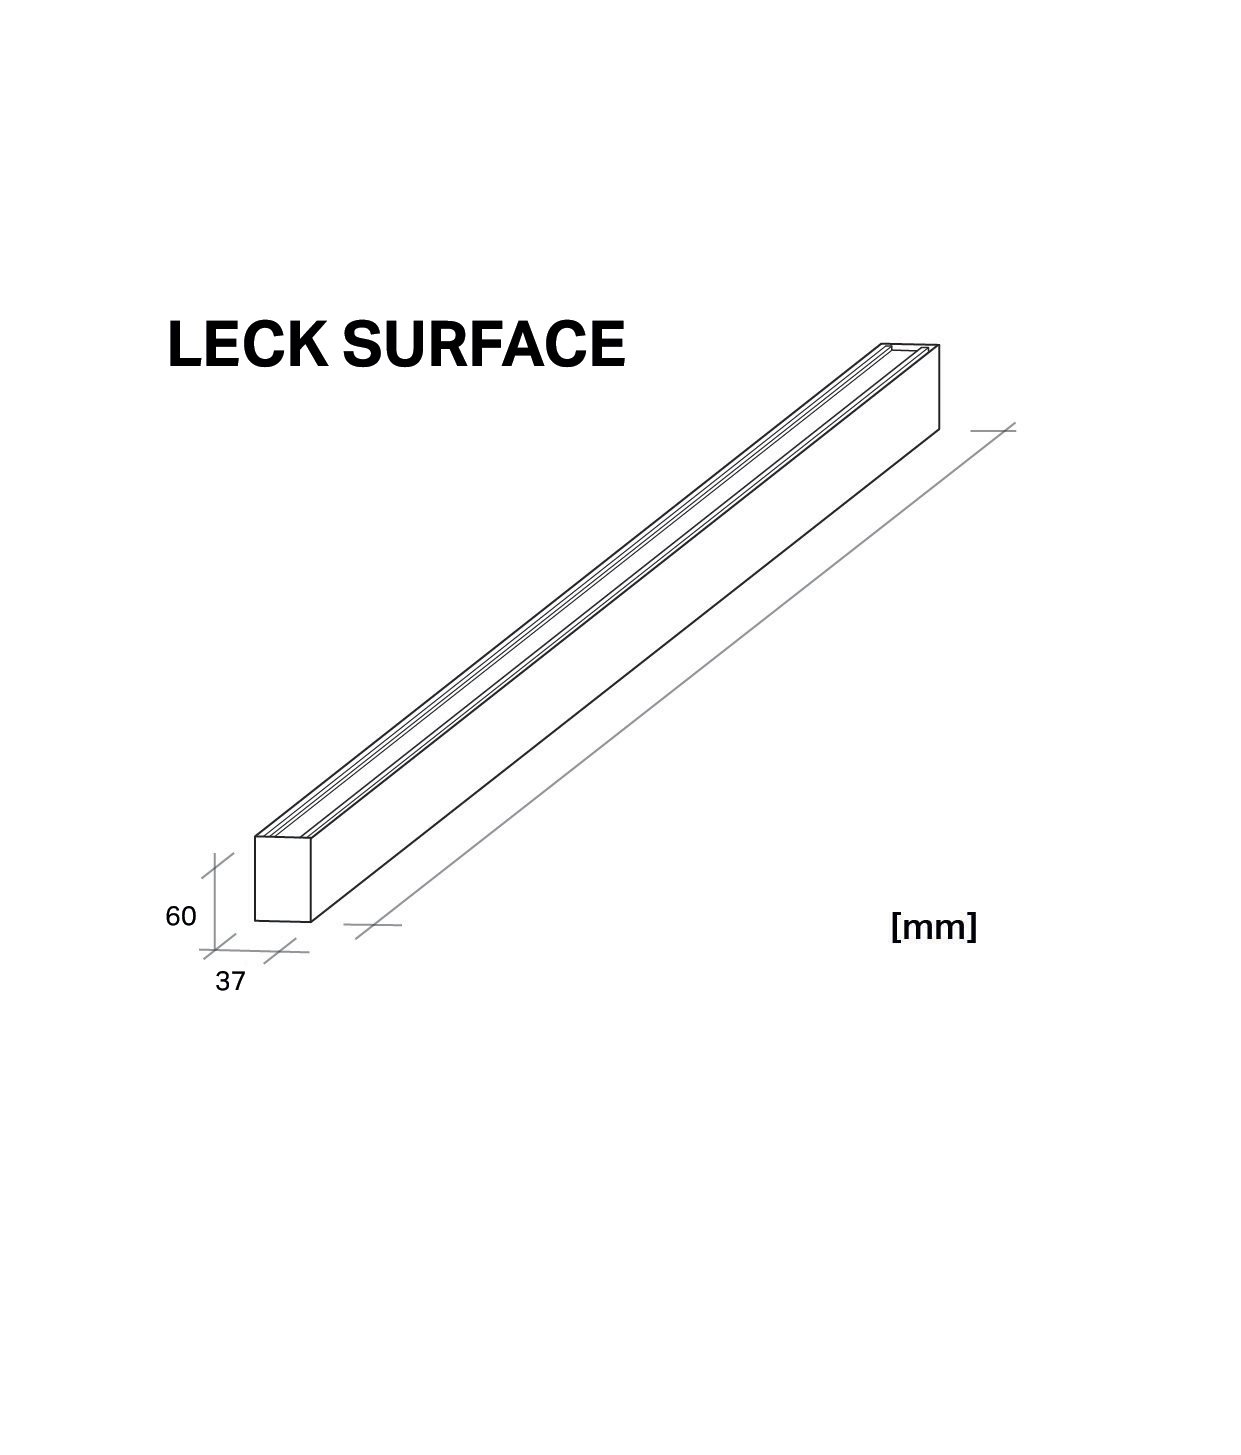 leck-surface-technical-drawing